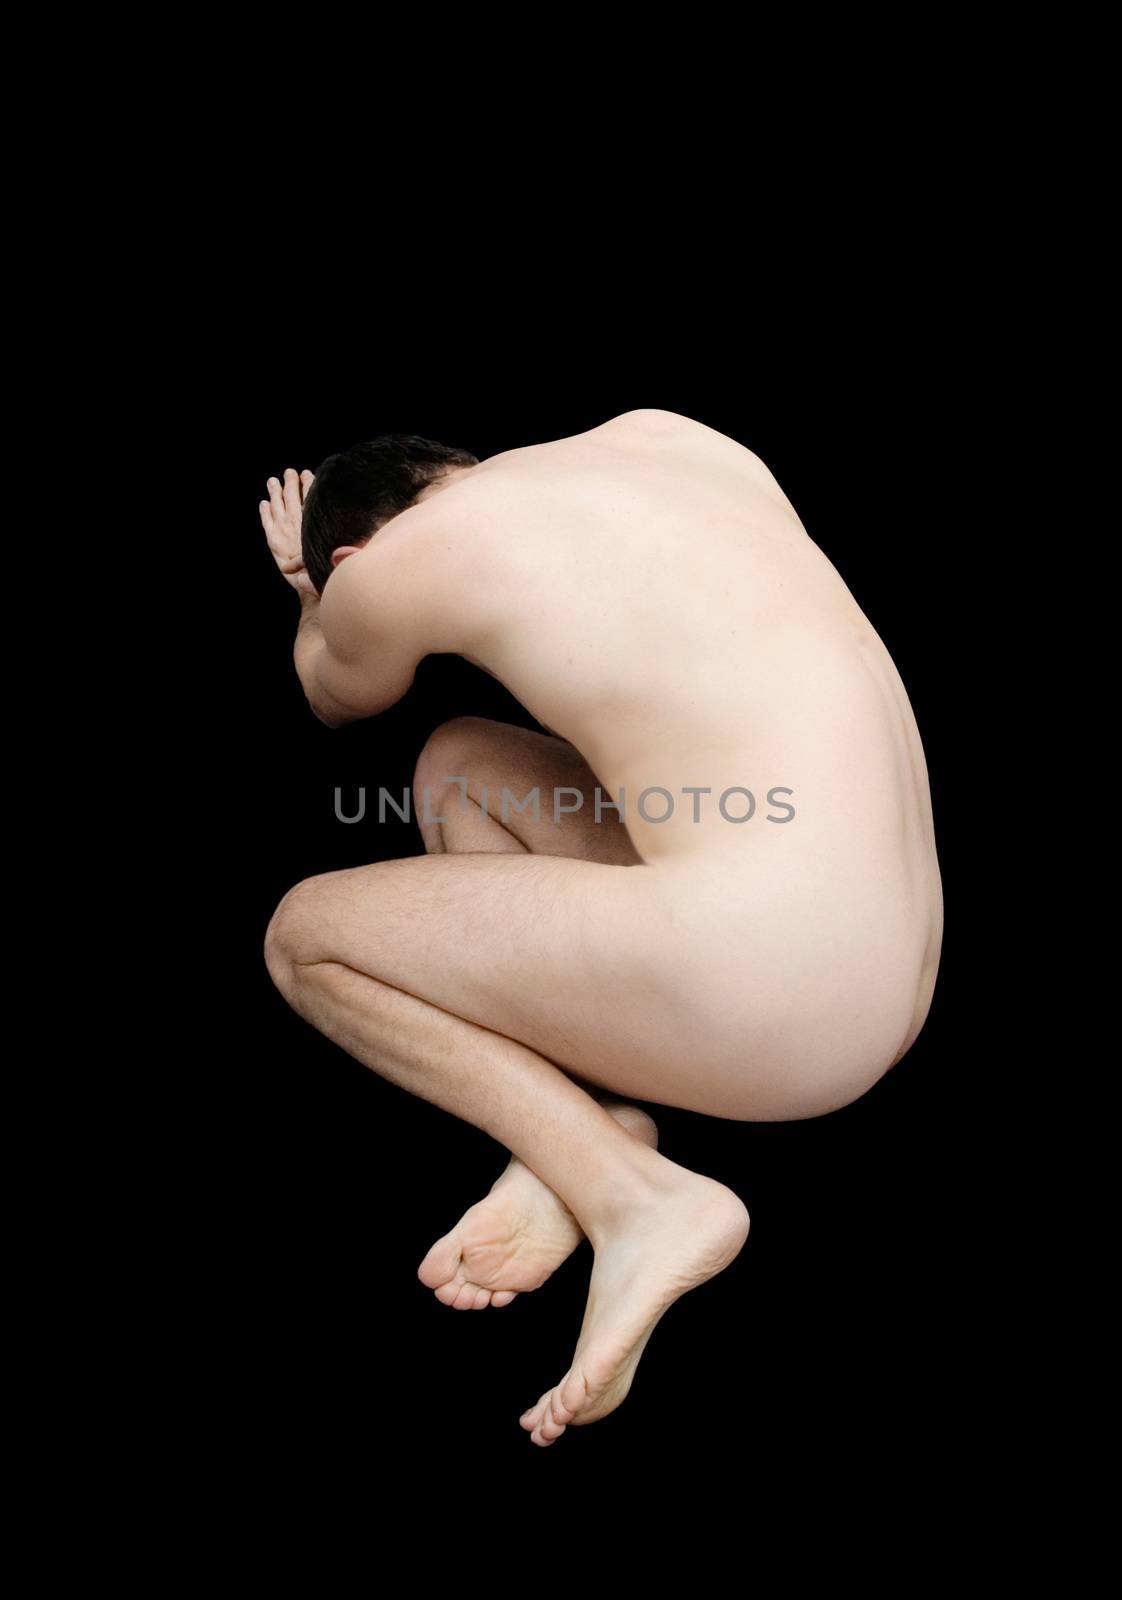 A naked man shown in an interesting position by MaxalTamor